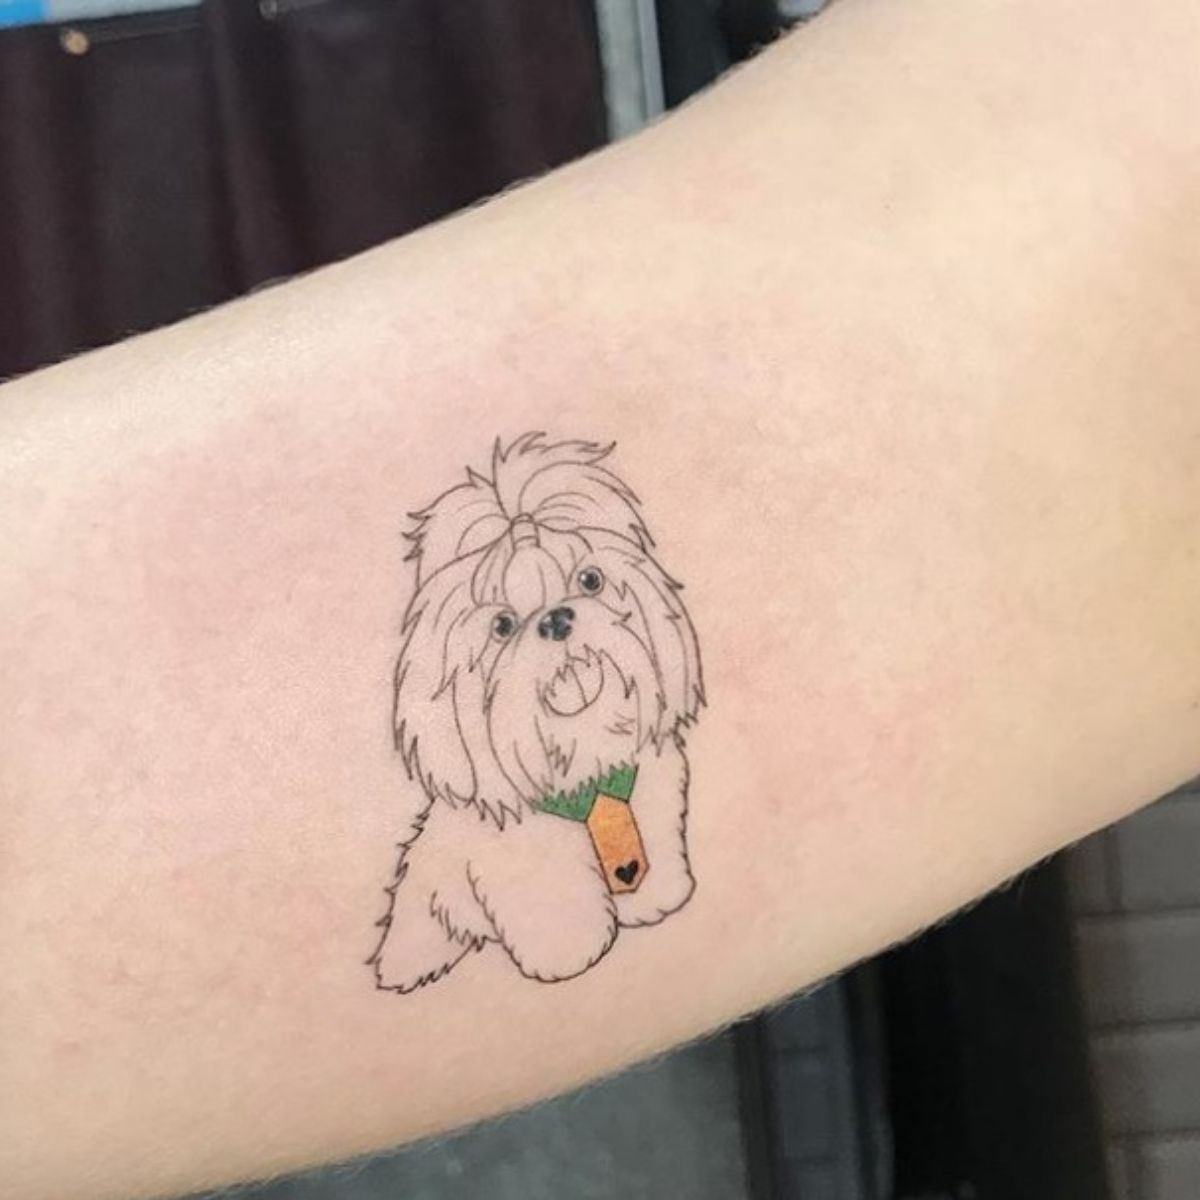 Woman gets a tattoo of her dog that ends up looking like male genitals   The Sun